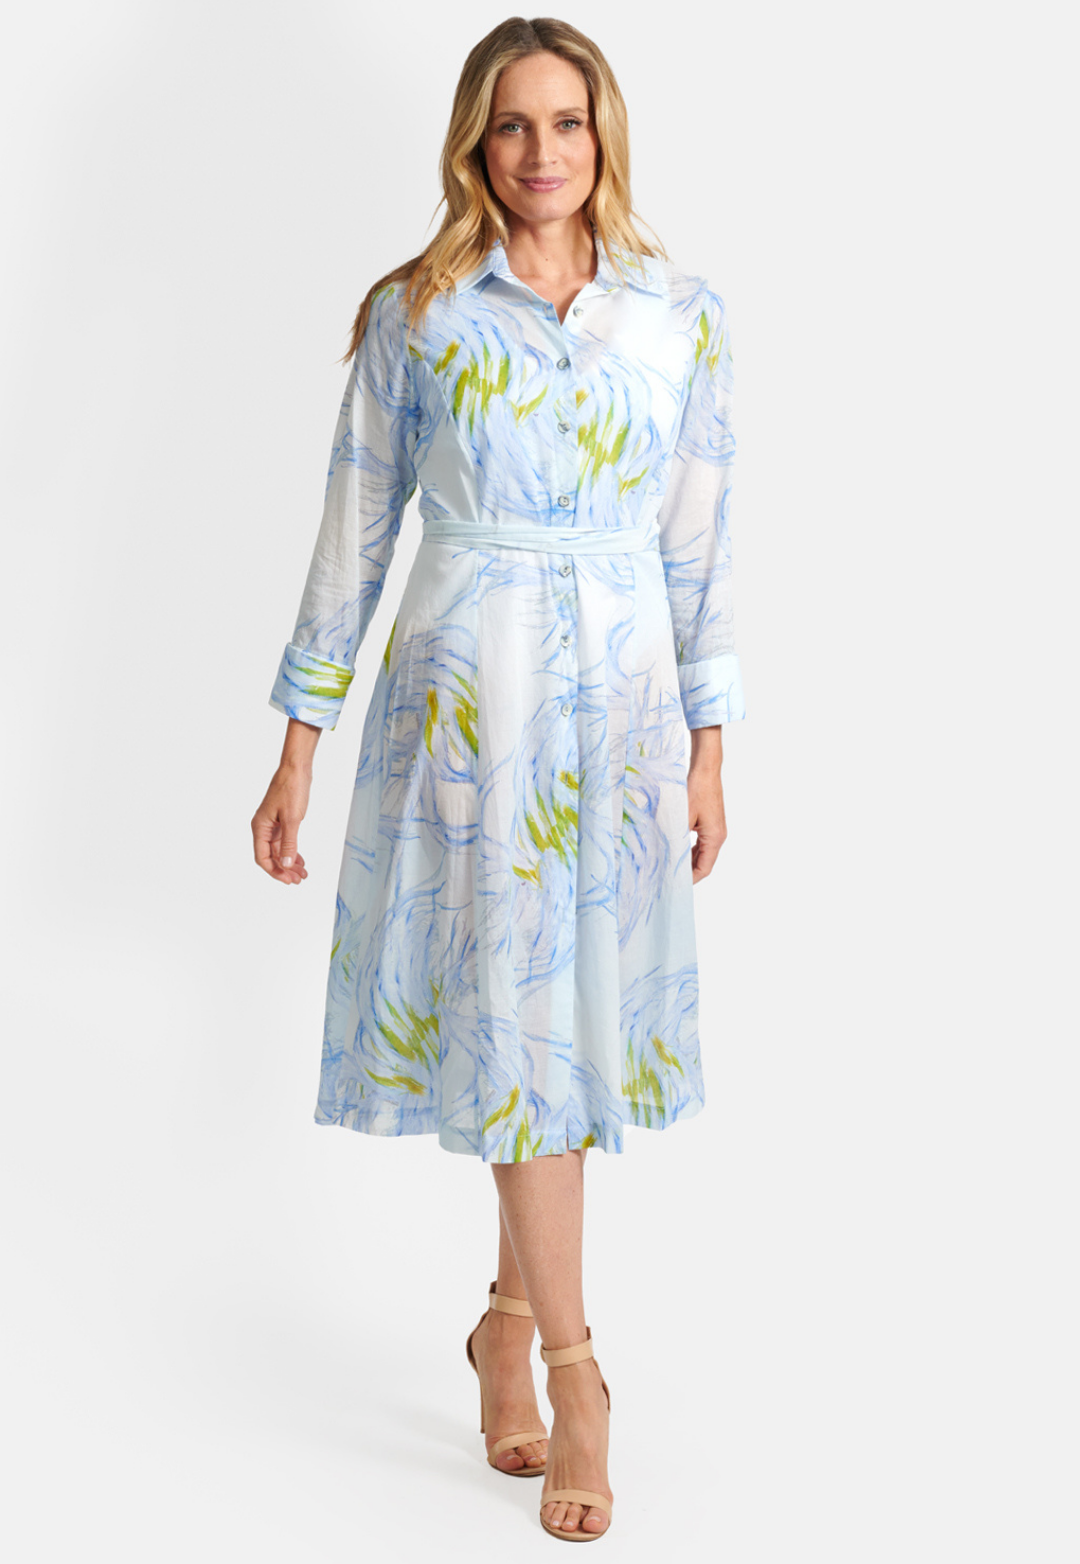 Woman wearing blue feather printed short cotton shirt dress with belt by Ala von Auersperg